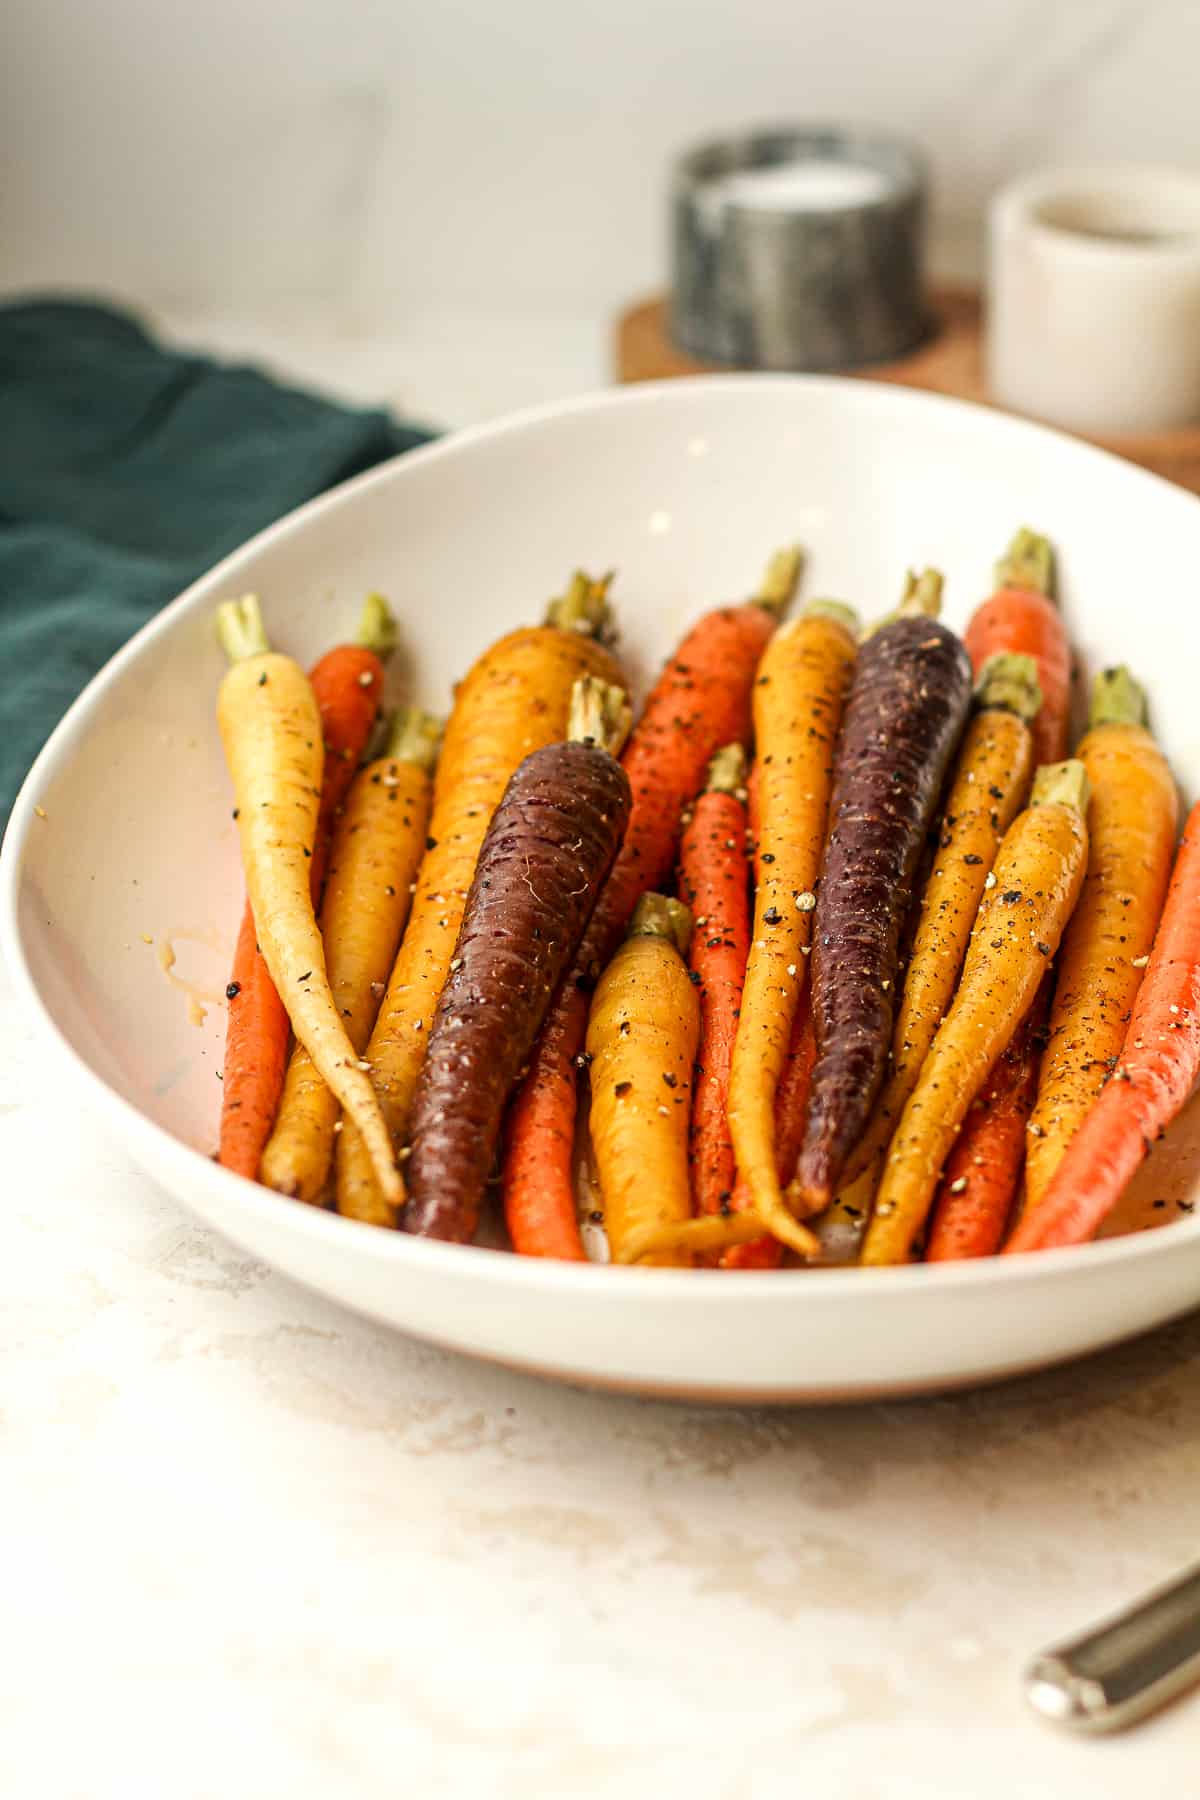 Side dish of some whole maple carrots.